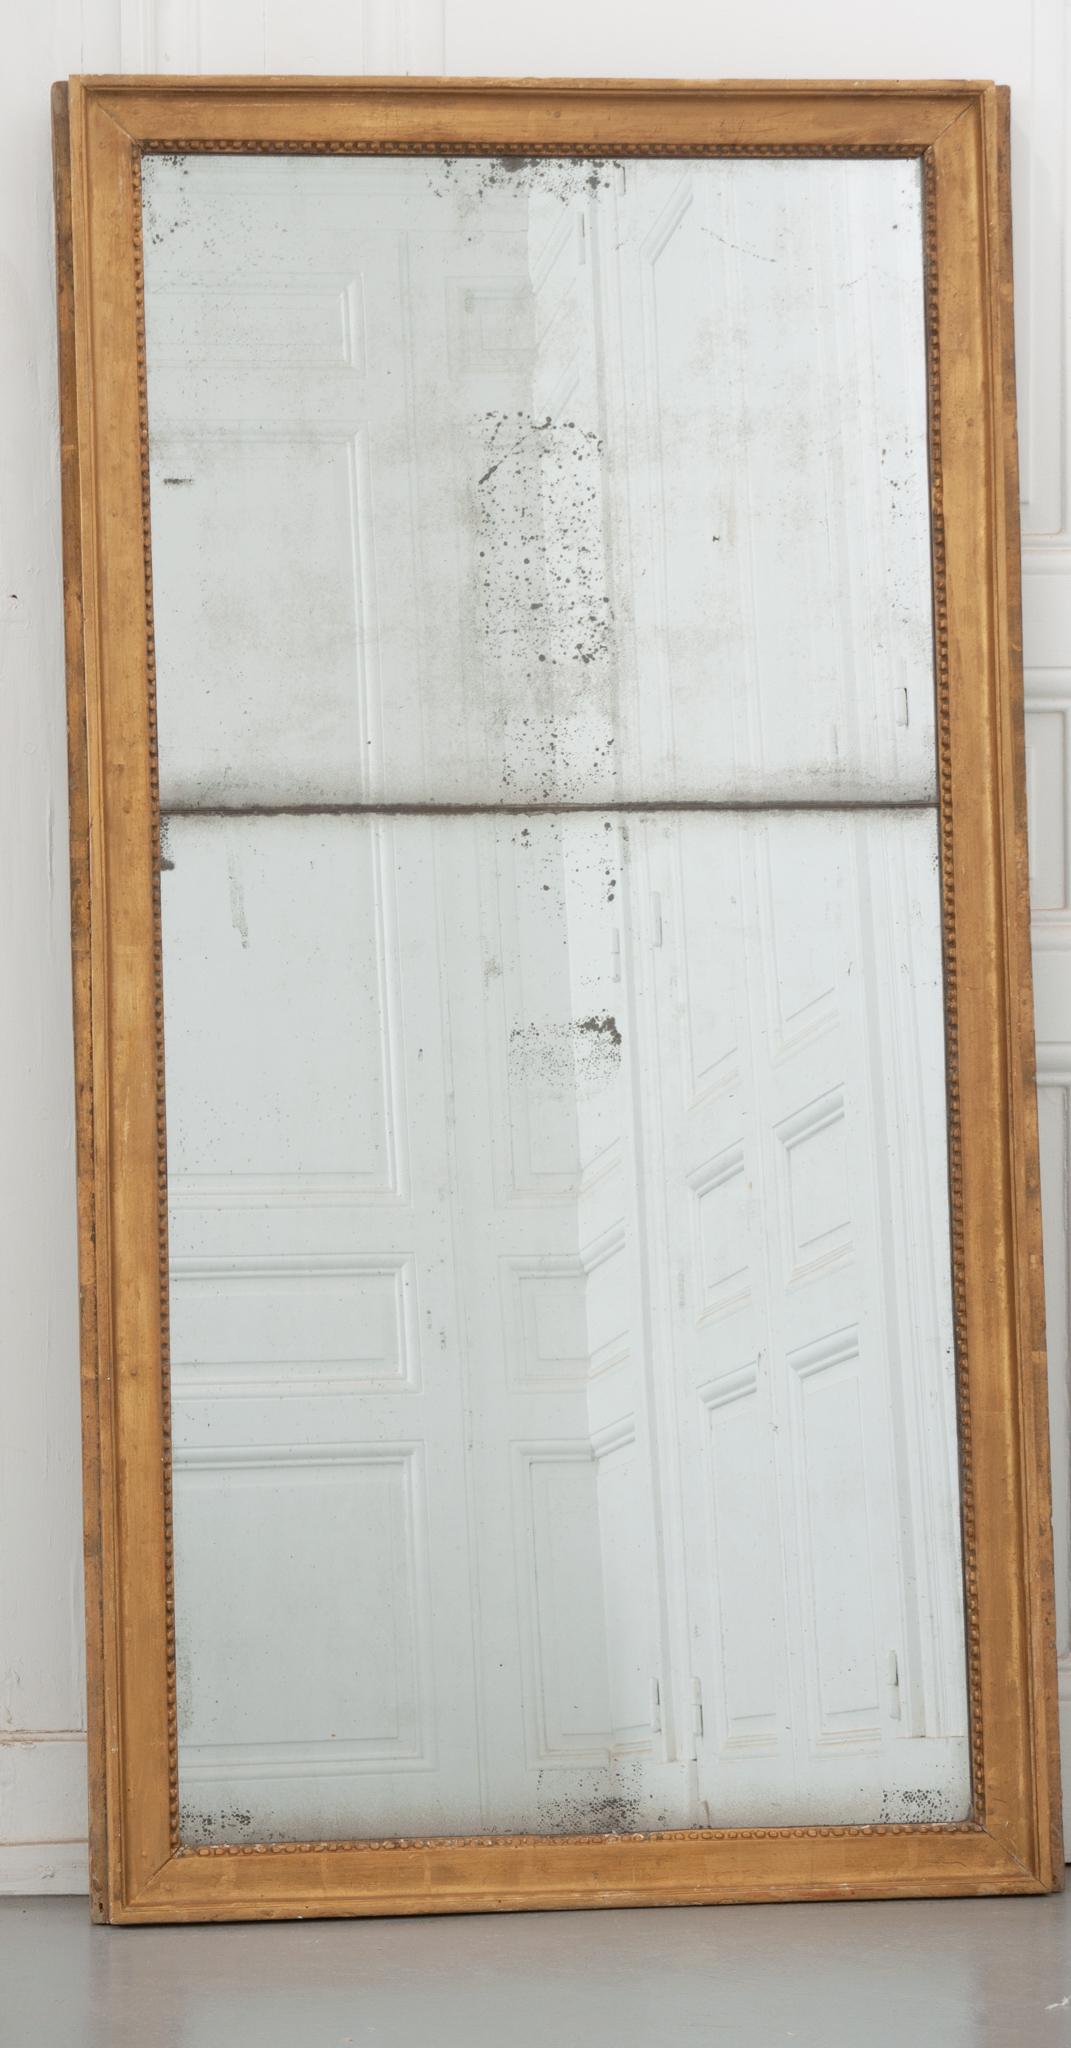 A beautifully simple 19th century mirror with the perfect amount of antique character. The original stacked mirror plates, from a time before large single plates of glass were available in France, have a touch of foxing that gives the whole a great